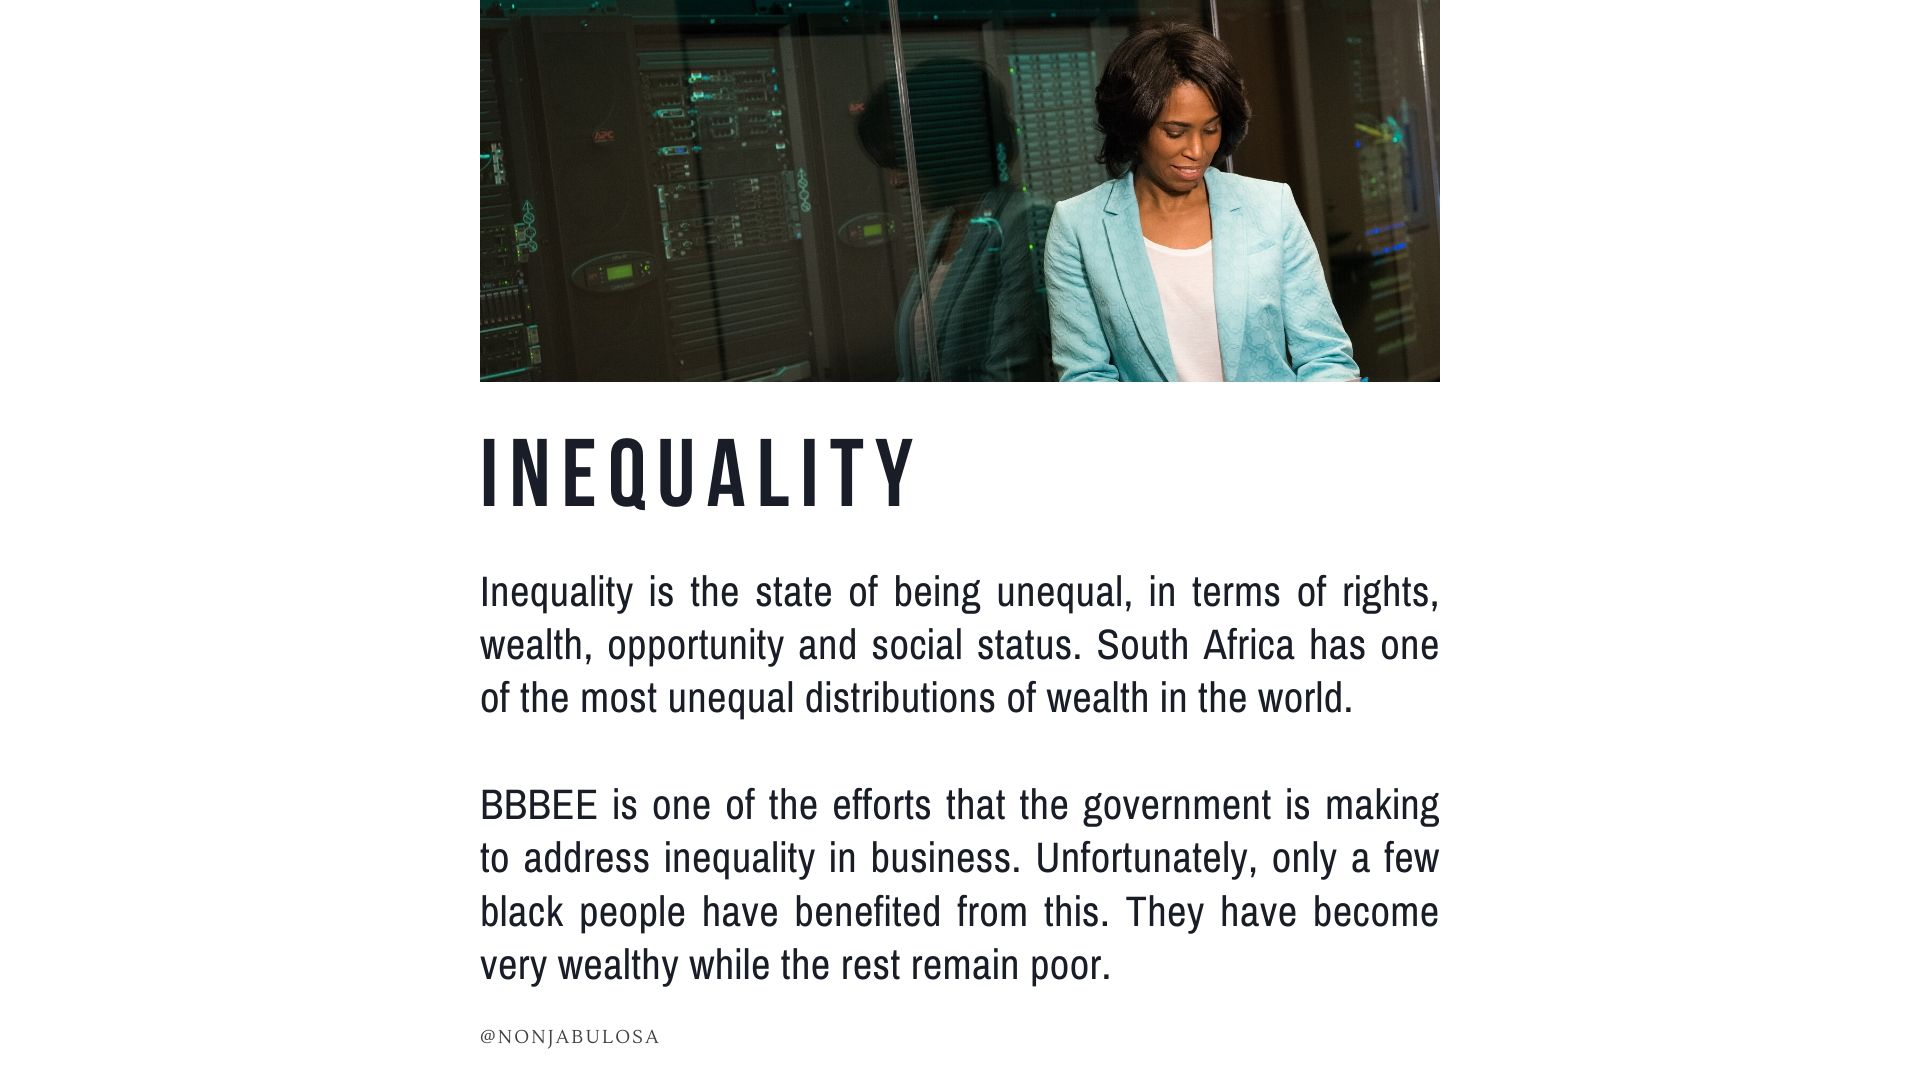 List of South African Contemporary Socio-Economic Issues - Definition and explanation of inequality